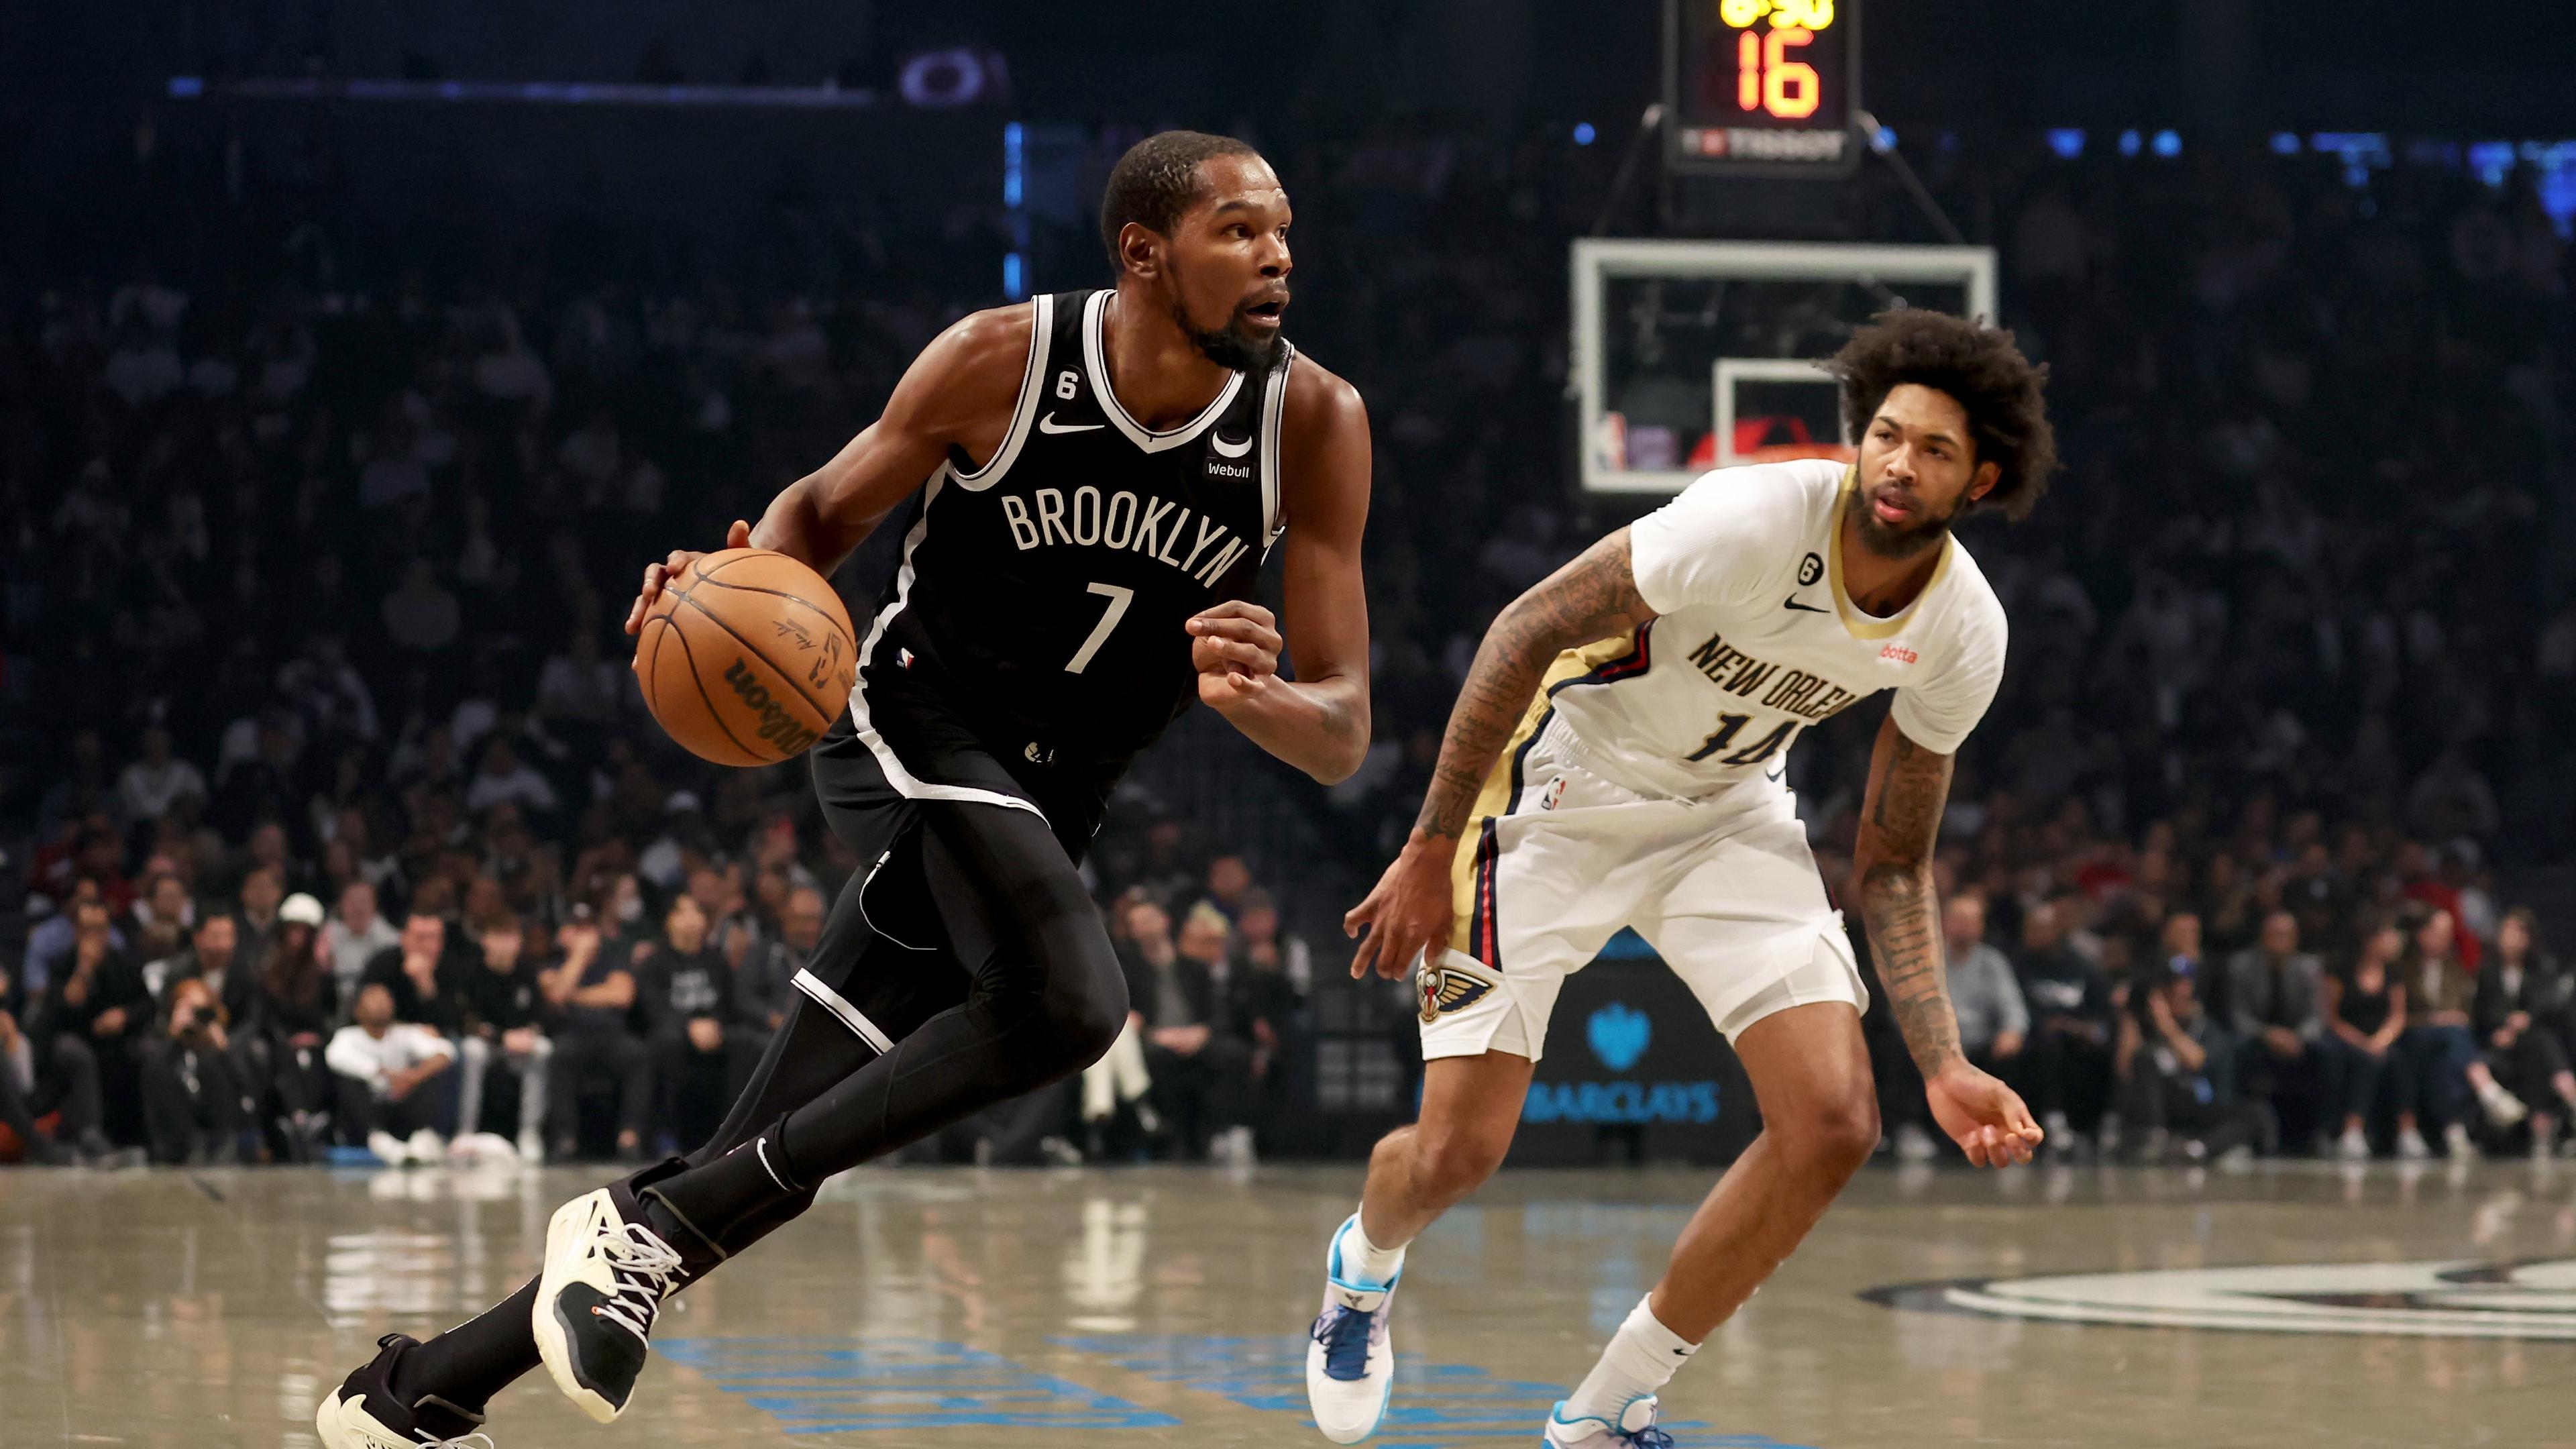 Oct 19, 2022; Brooklyn, New York, USA; Brooklyn Nets forward Kevin Durant (7) drives to the basket against New Orleans Pelicans forward Brandon Ingram (14) during the first quarter at Barclays Center. Mandatory Credit: Brad Penner-USA TODAY Sports / © Brad Penner-USA TODAY Sports